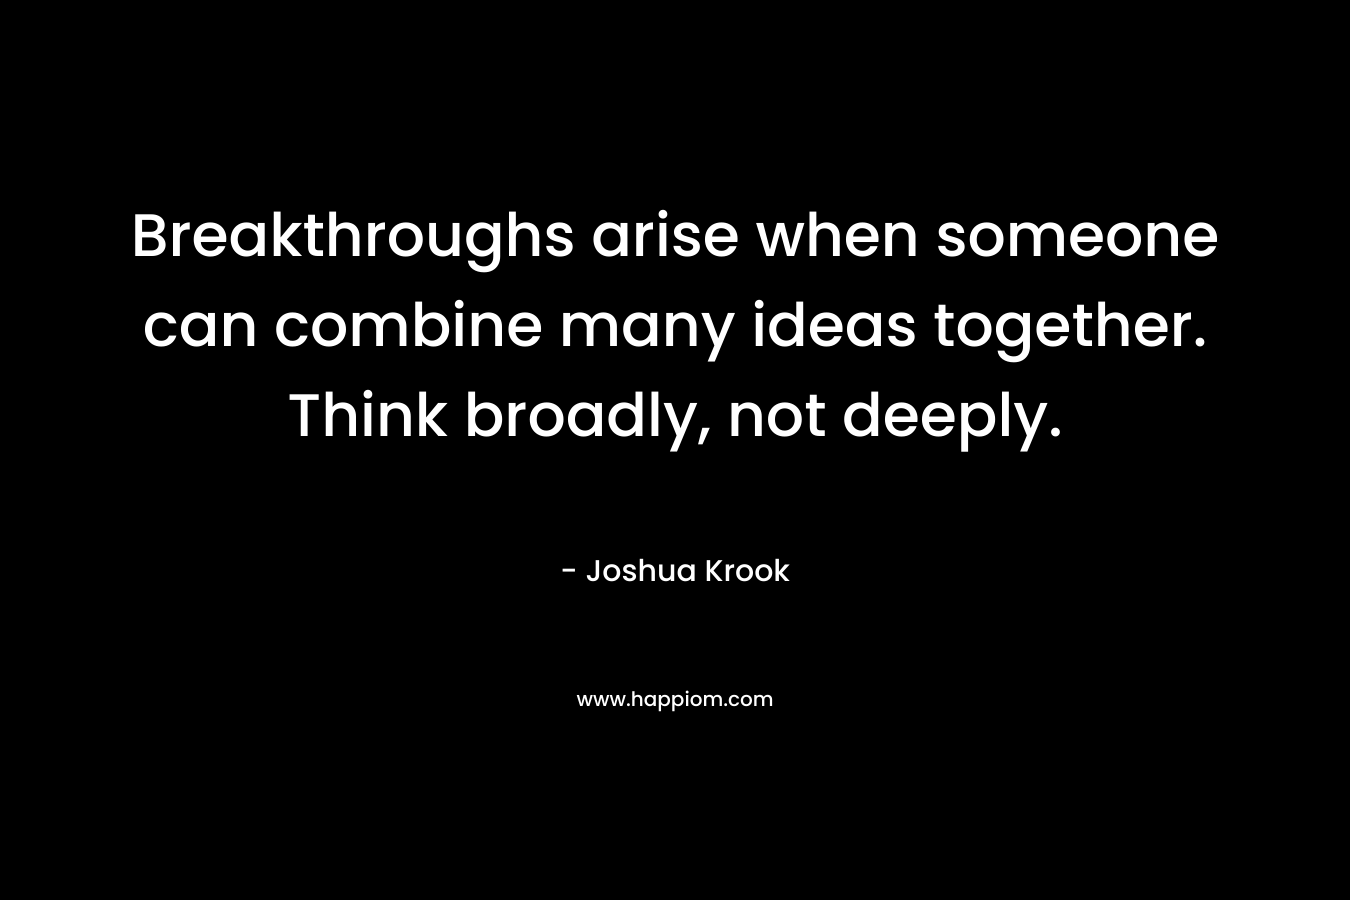 Breakthroughs arise when someone can combine many ideas together. Think broadly, not deeply.